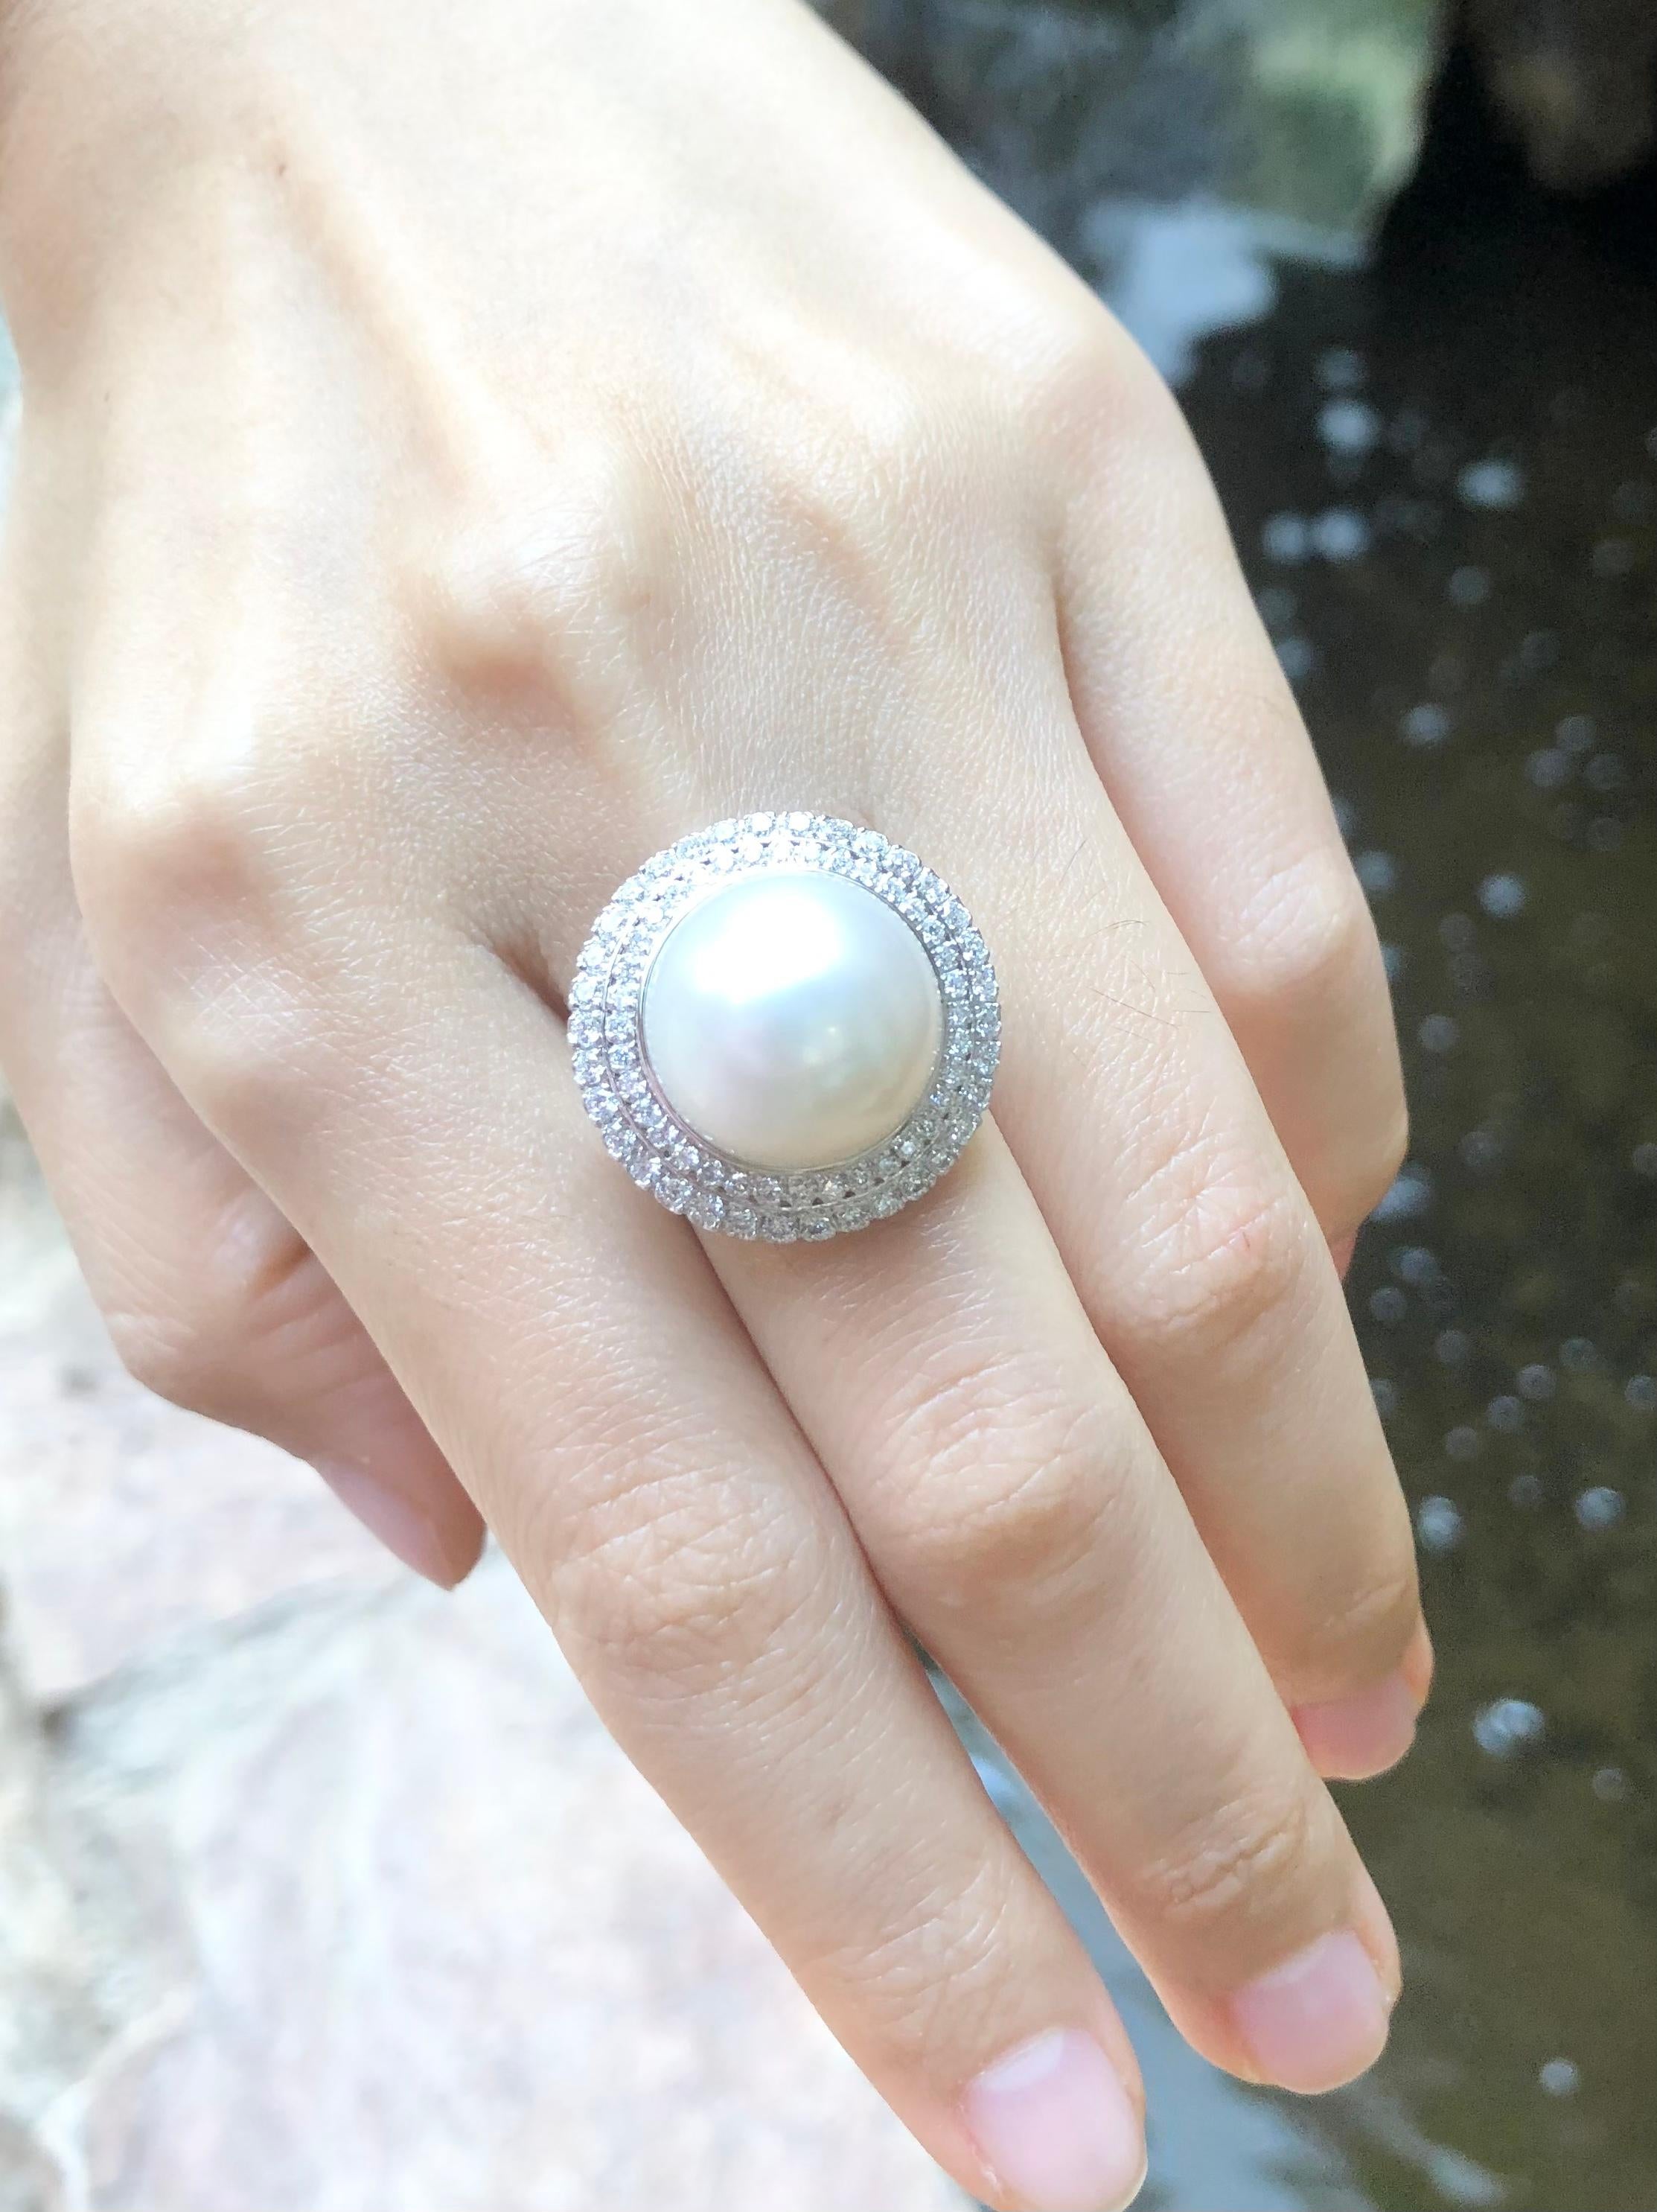 South Sea Pearl with Diamond 0.97 carat Ring set in 18 Karat White Gold Settings

Width:  2.1 cm 
Length: 2.1 cm
Ring Size: 53
Total Weight: 11.33 grams

South Sea Pearl: 14.5 mm

